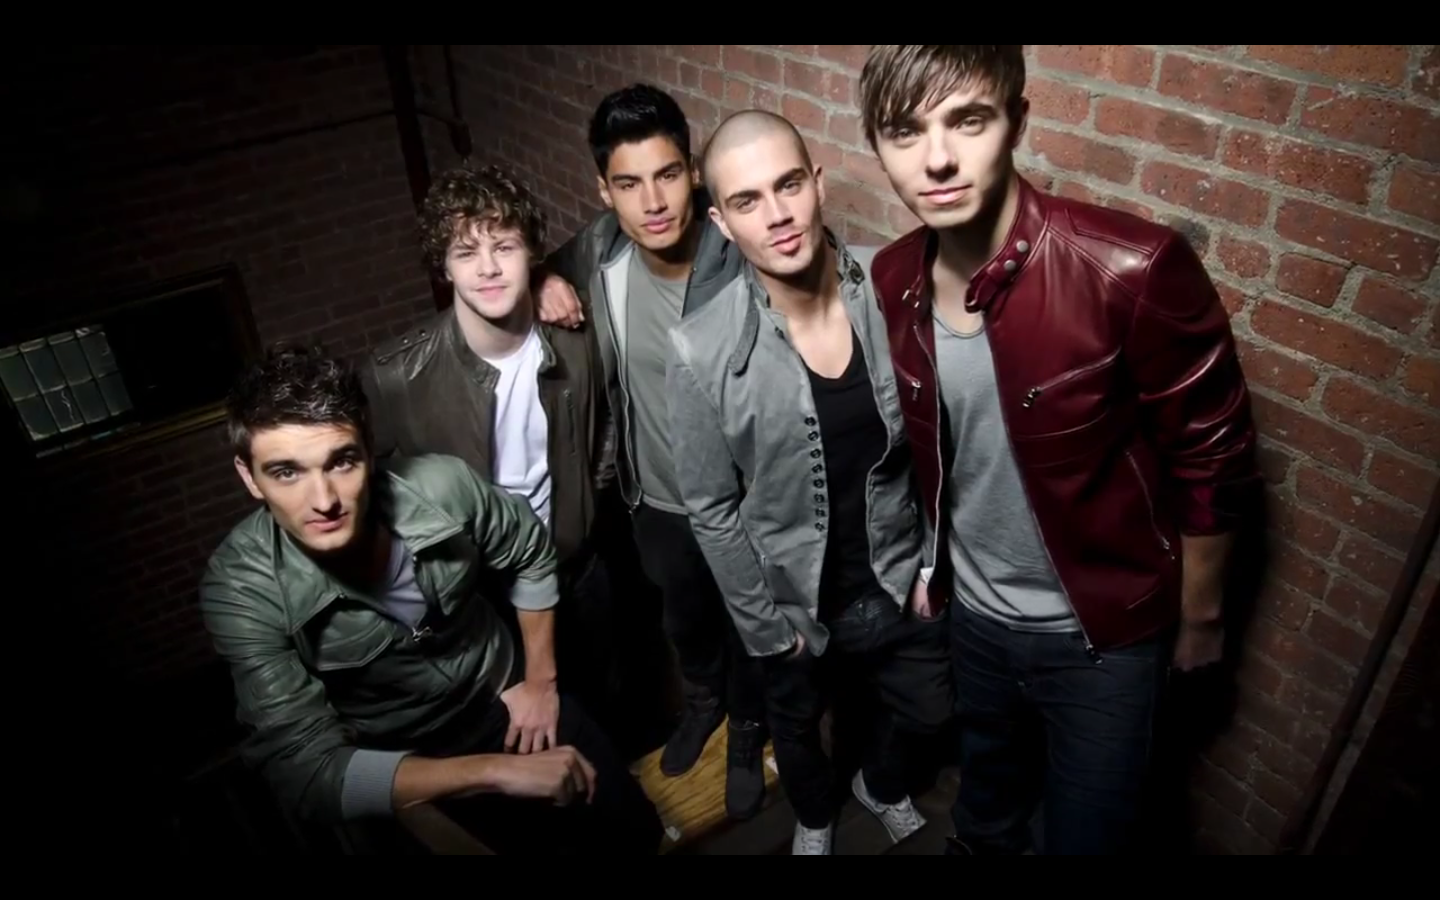 The. Want. Группа the wanted. Участники the wanted. Джастин Бибер и группа the wanted.